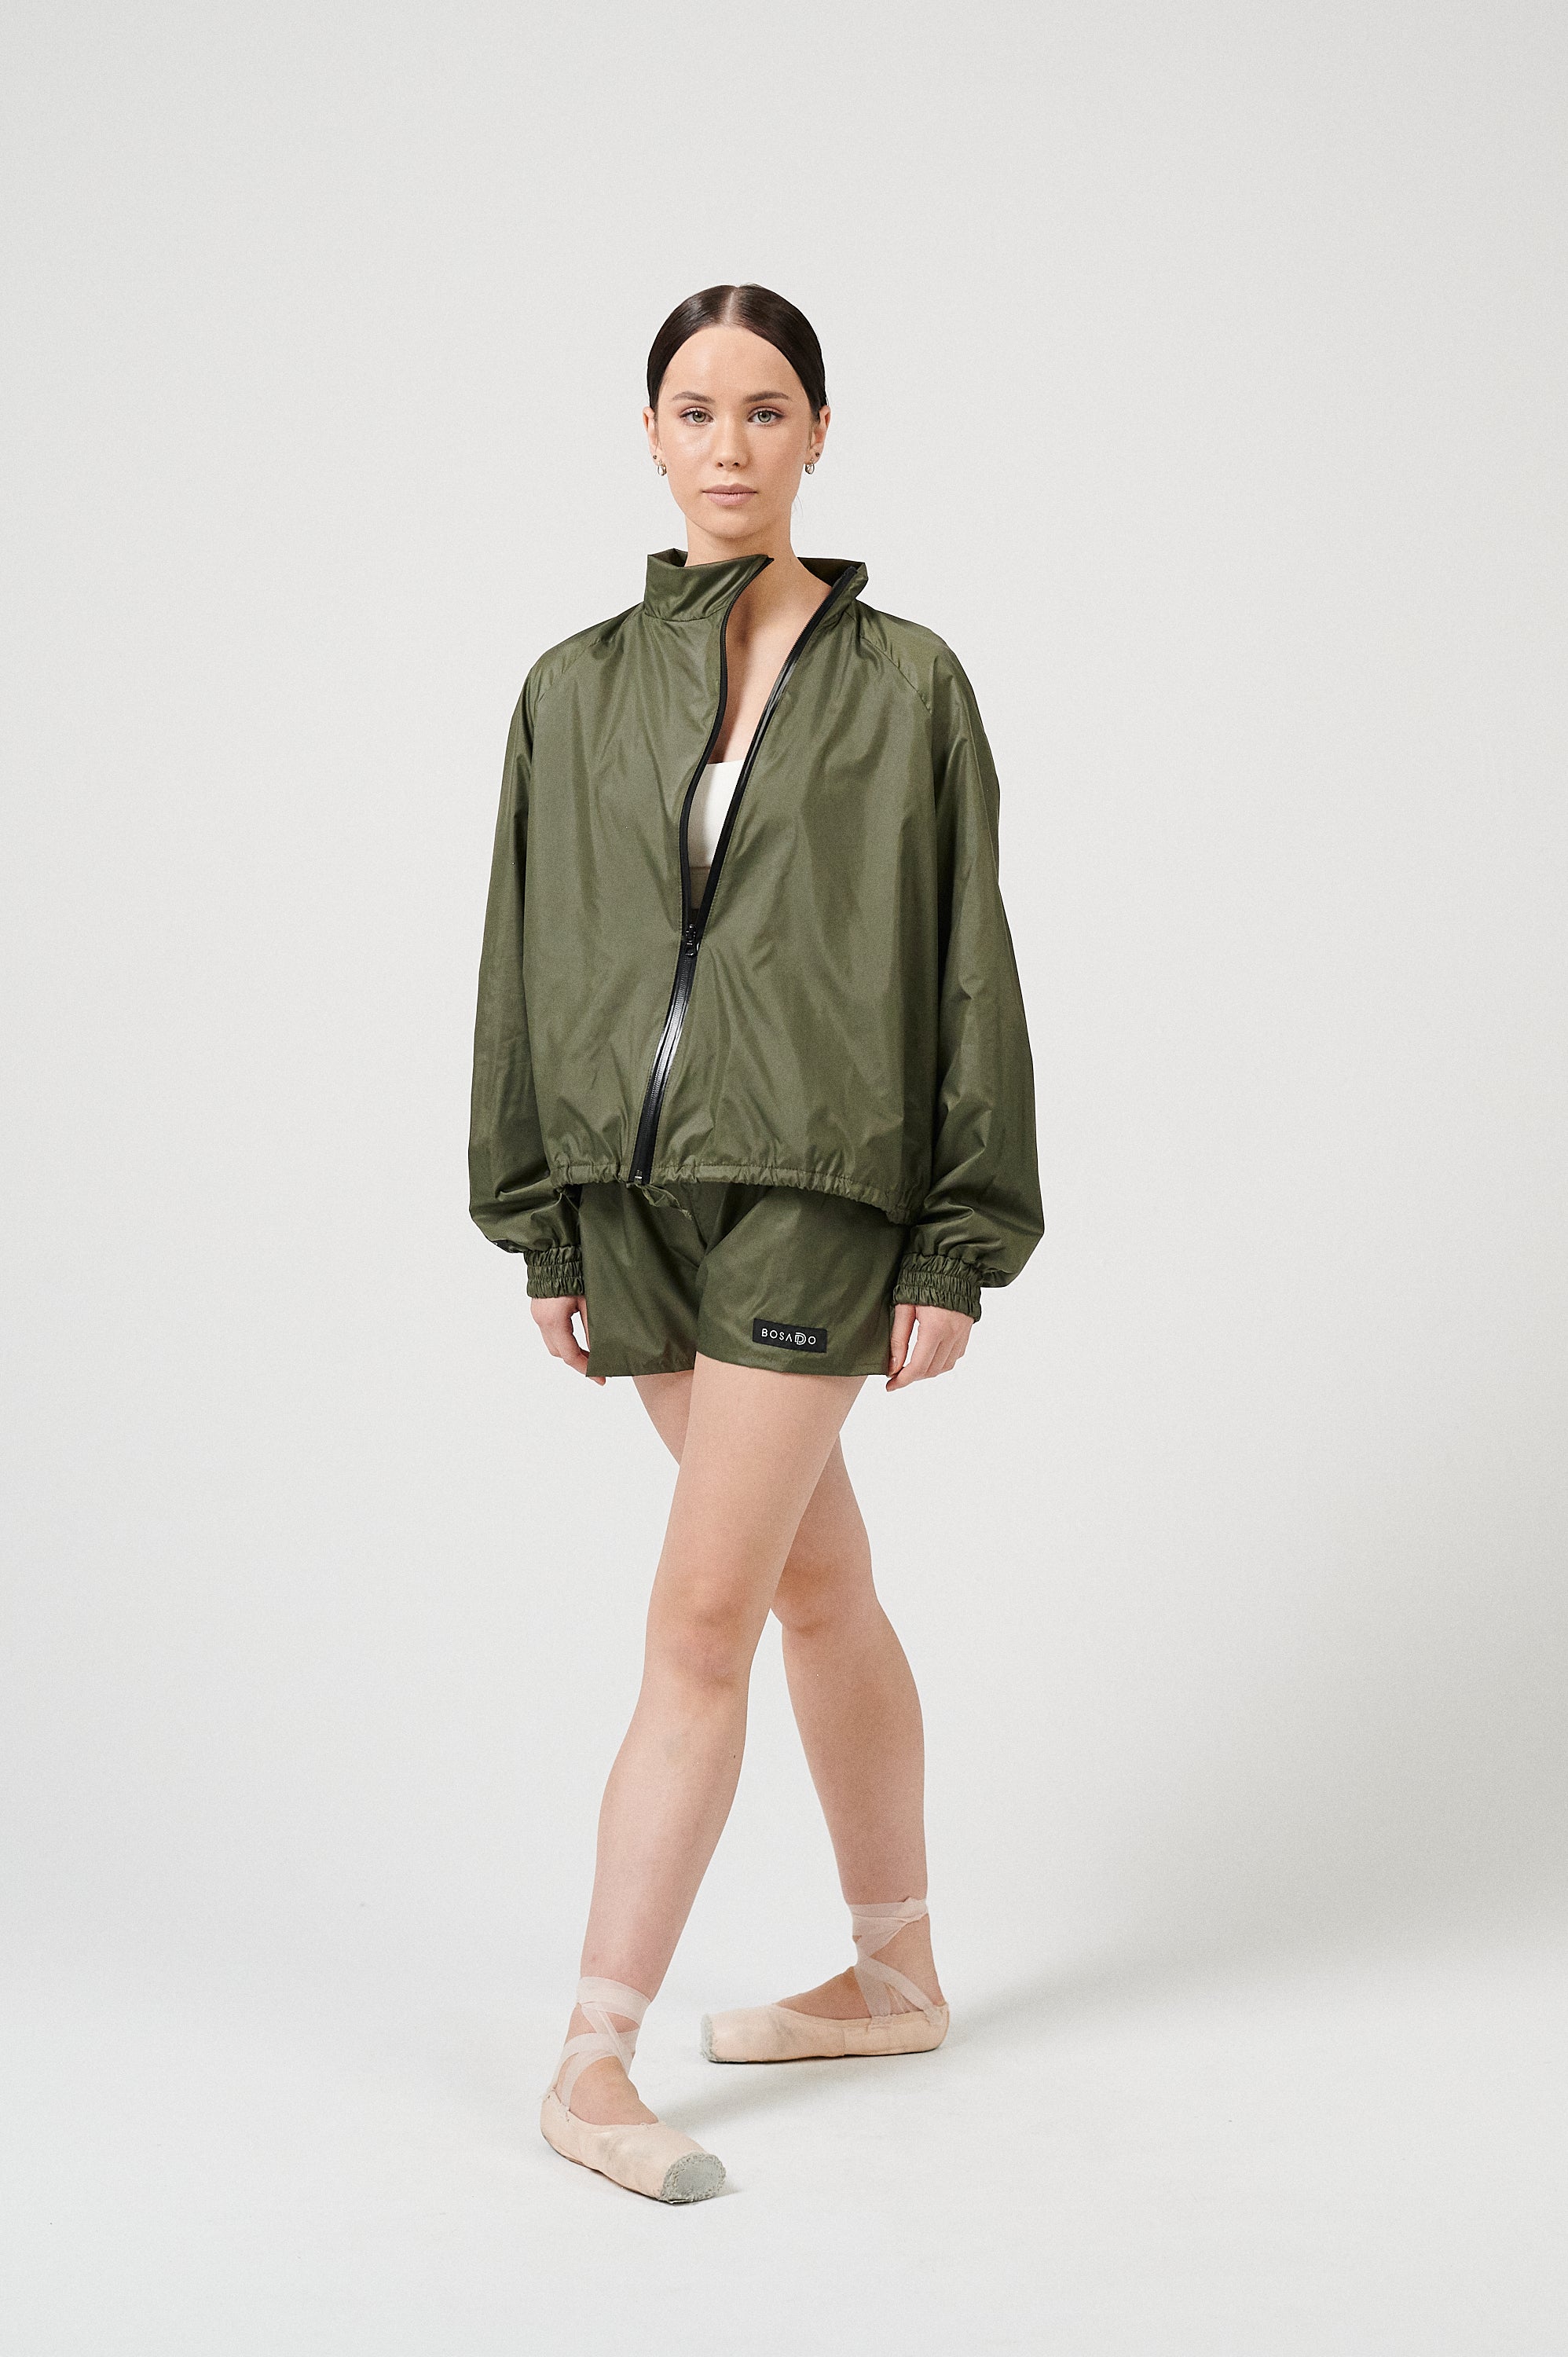 FUTURE GISELLE COLLECTION 24 | Utopian khaki sports suit with shorts